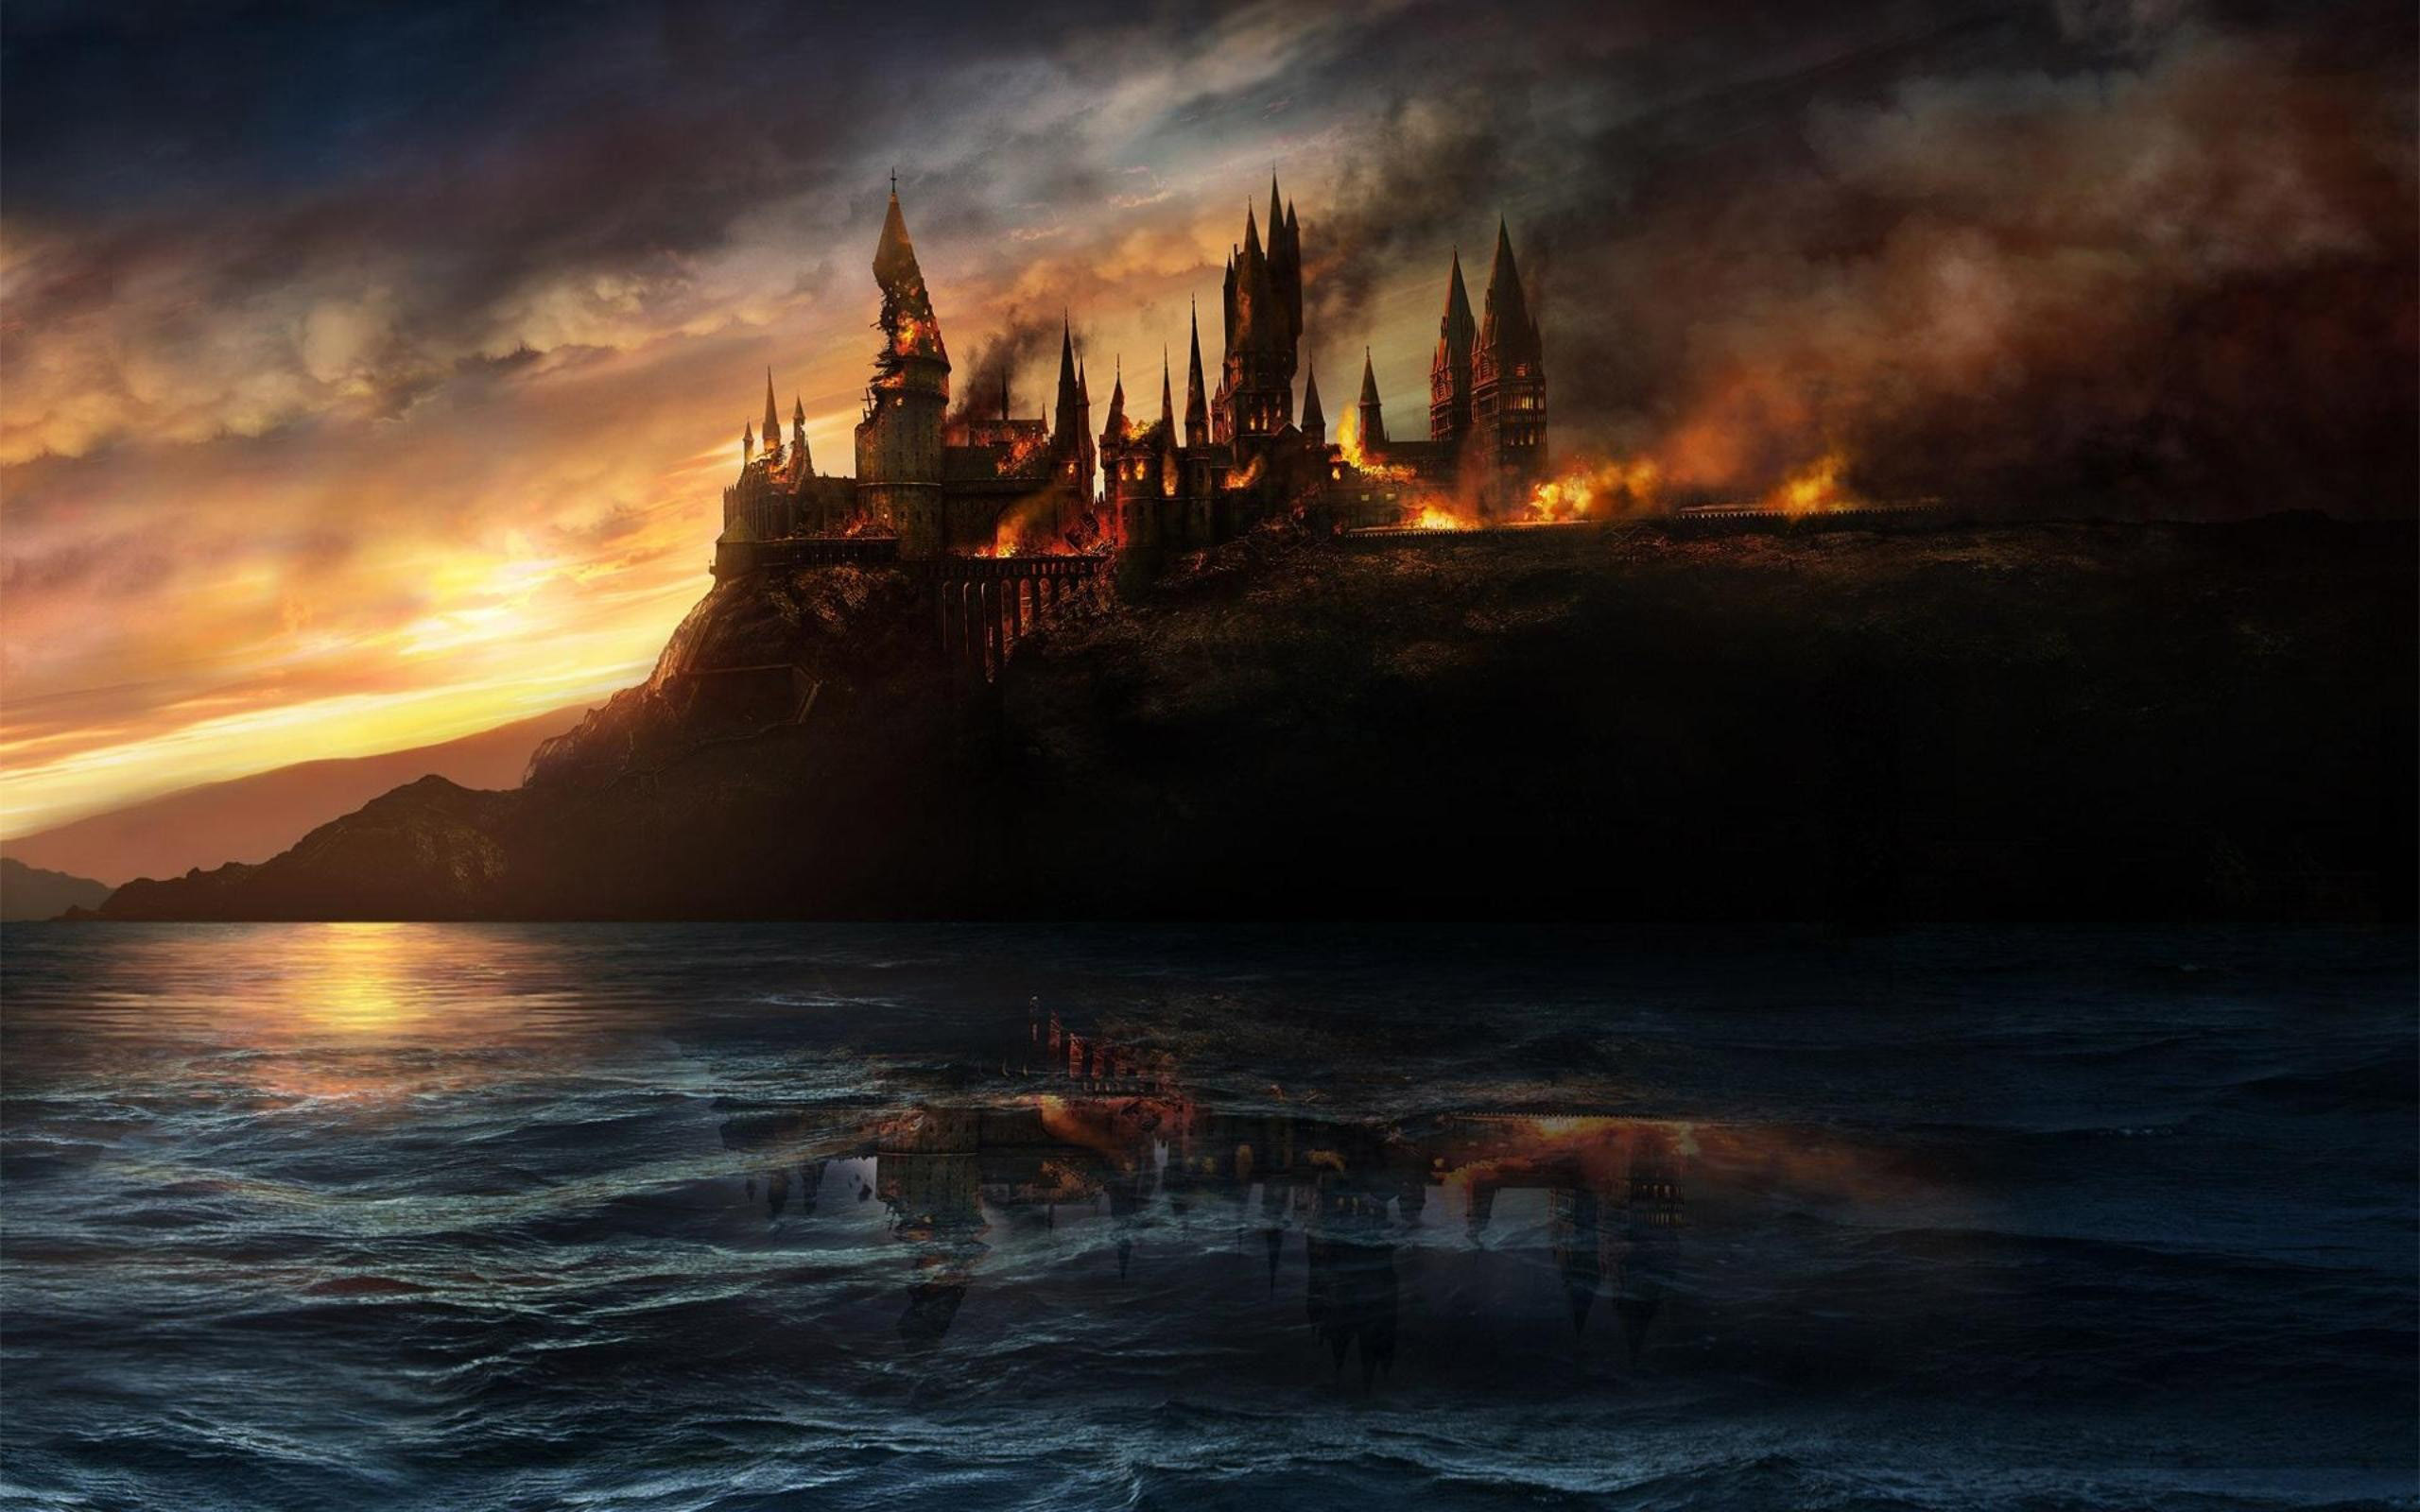 Harry Potter And The Deathly Hallows Hogwarts Castle